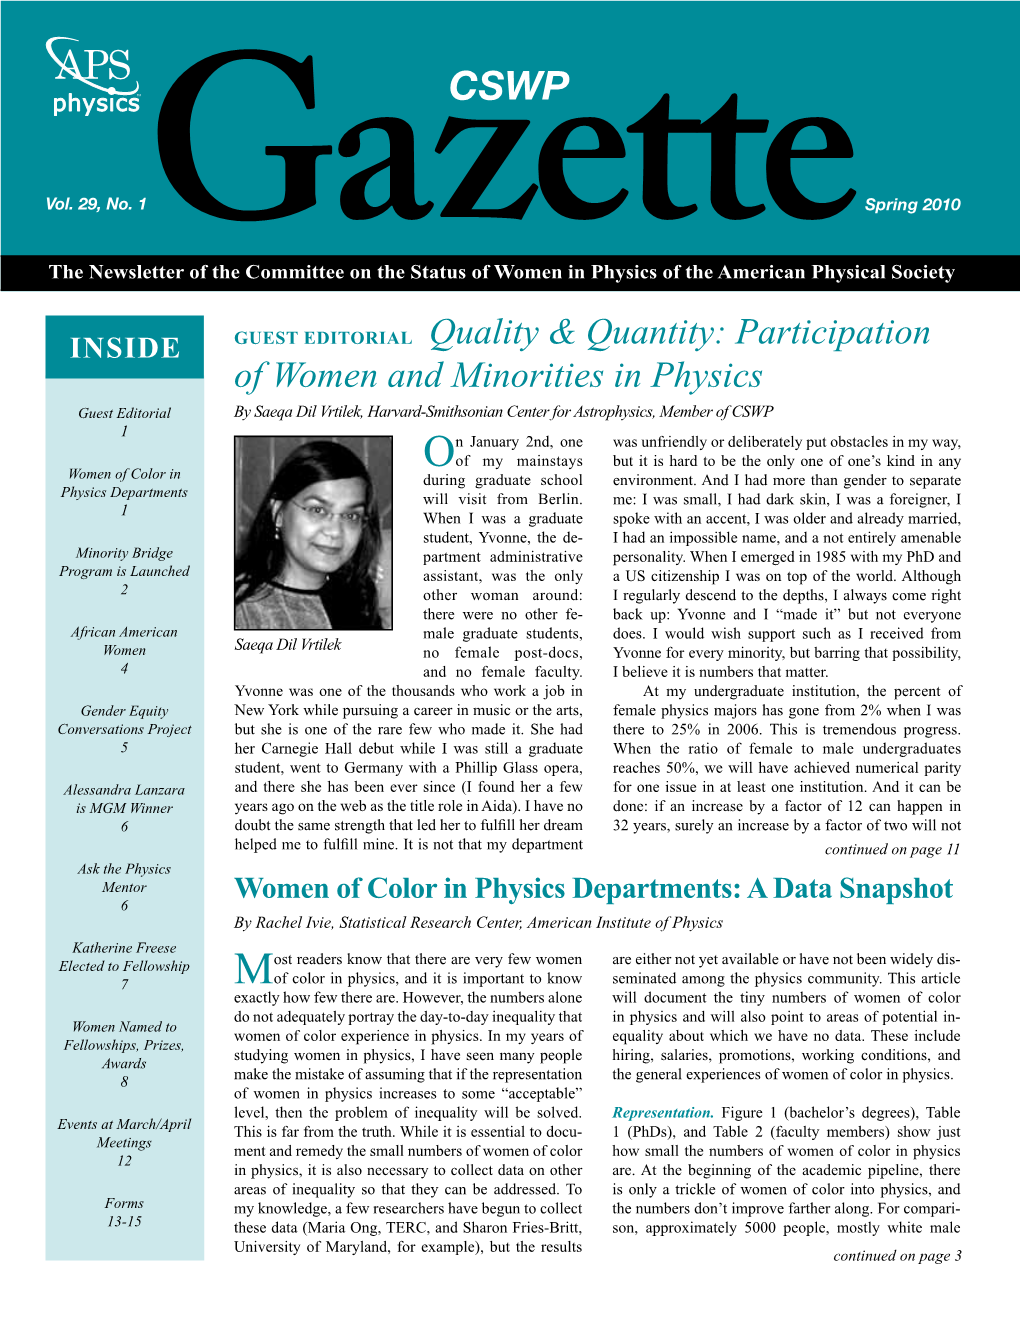 Quality & Quantity: Participation of Women and Minorities in Physics